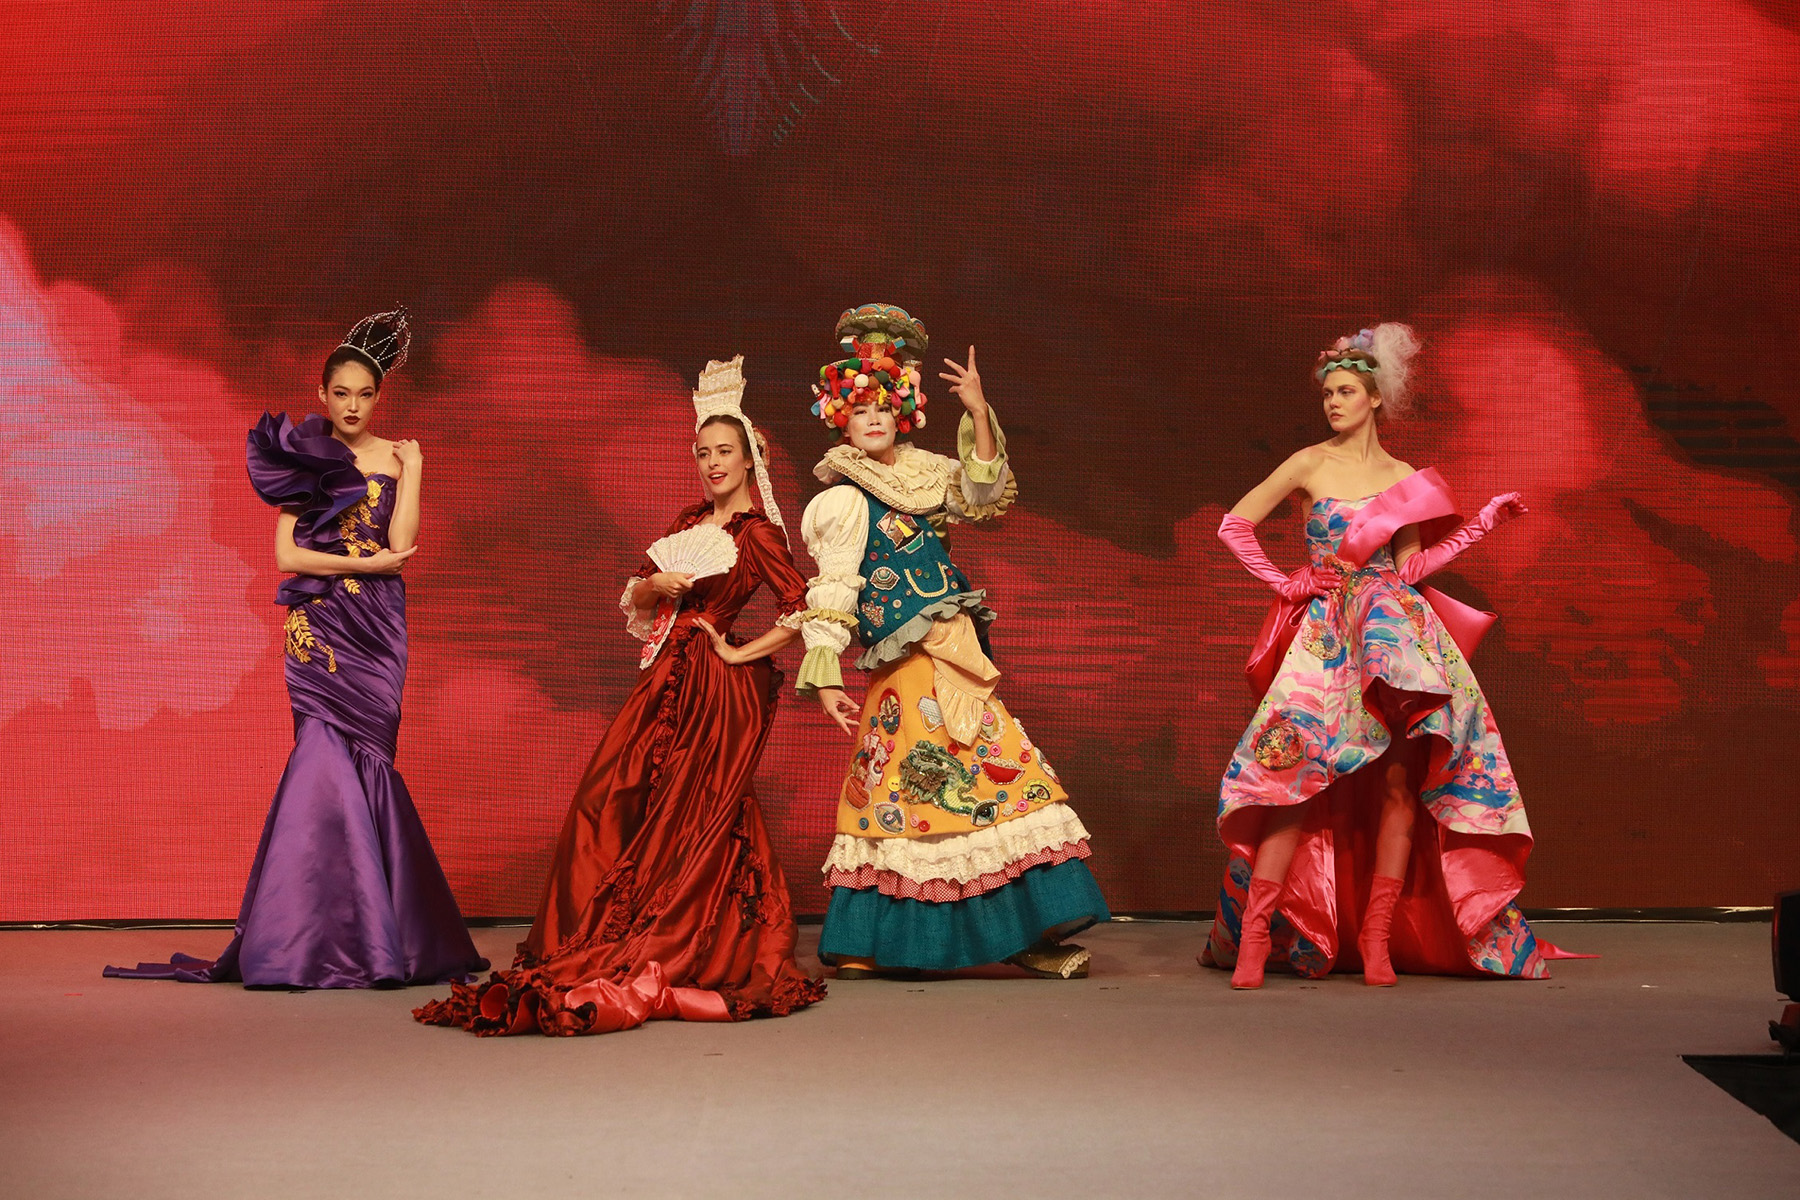 The “Fashion Show – Elite Extravaganza” organised by HKDI brought a whole new visual experience to the audience with choreographed fashion, dance and music performances